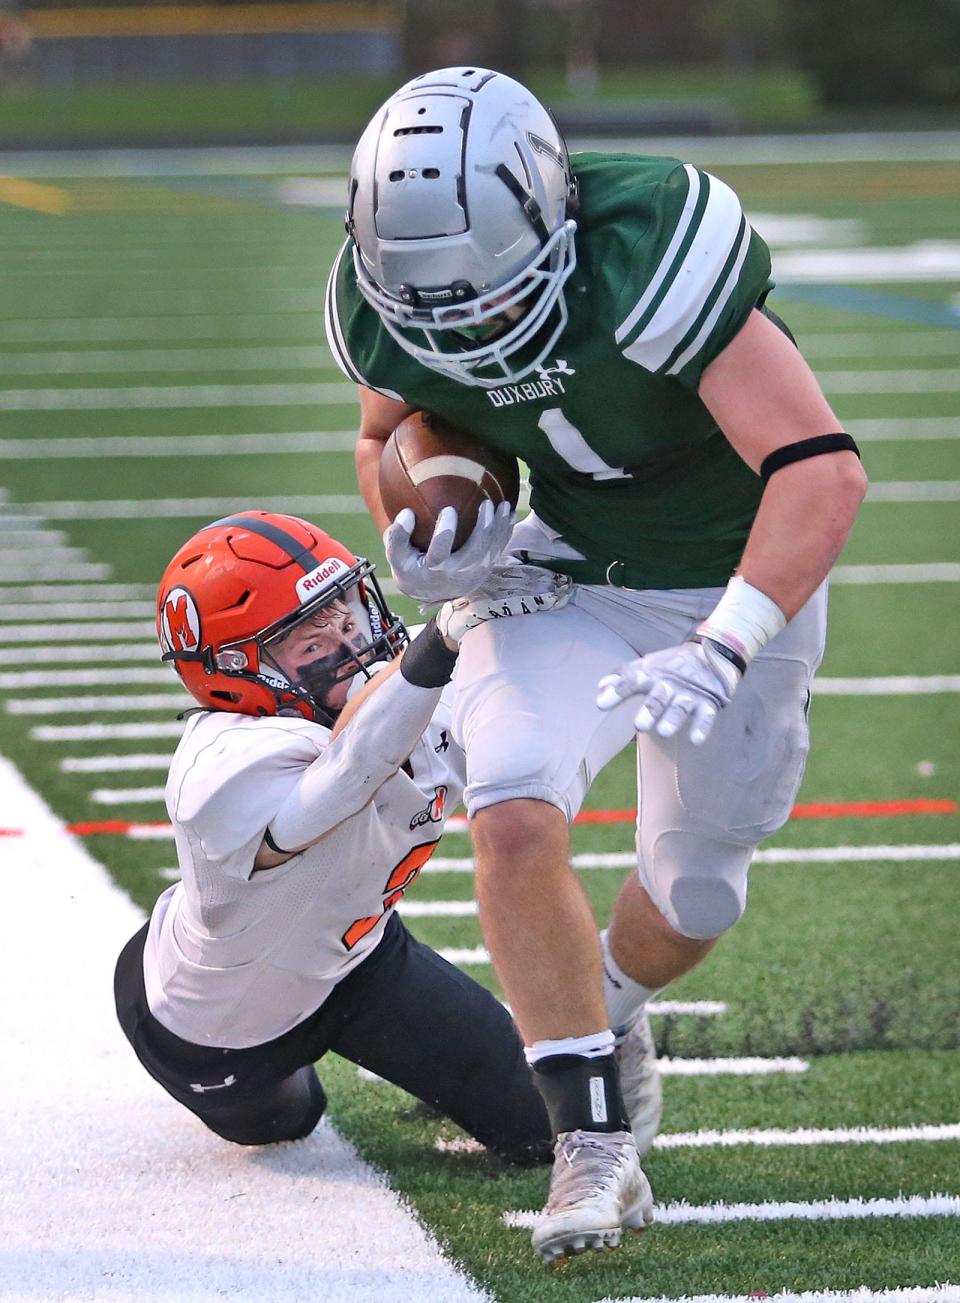 Dragon Alex Barlow tries to keep in bounds as Sachem Nate Tullish tries to drag him out.
The Duxbury Dragons hosted the Middleboro Sachems in MIAA football tournament action on Friday November 11, 2022.